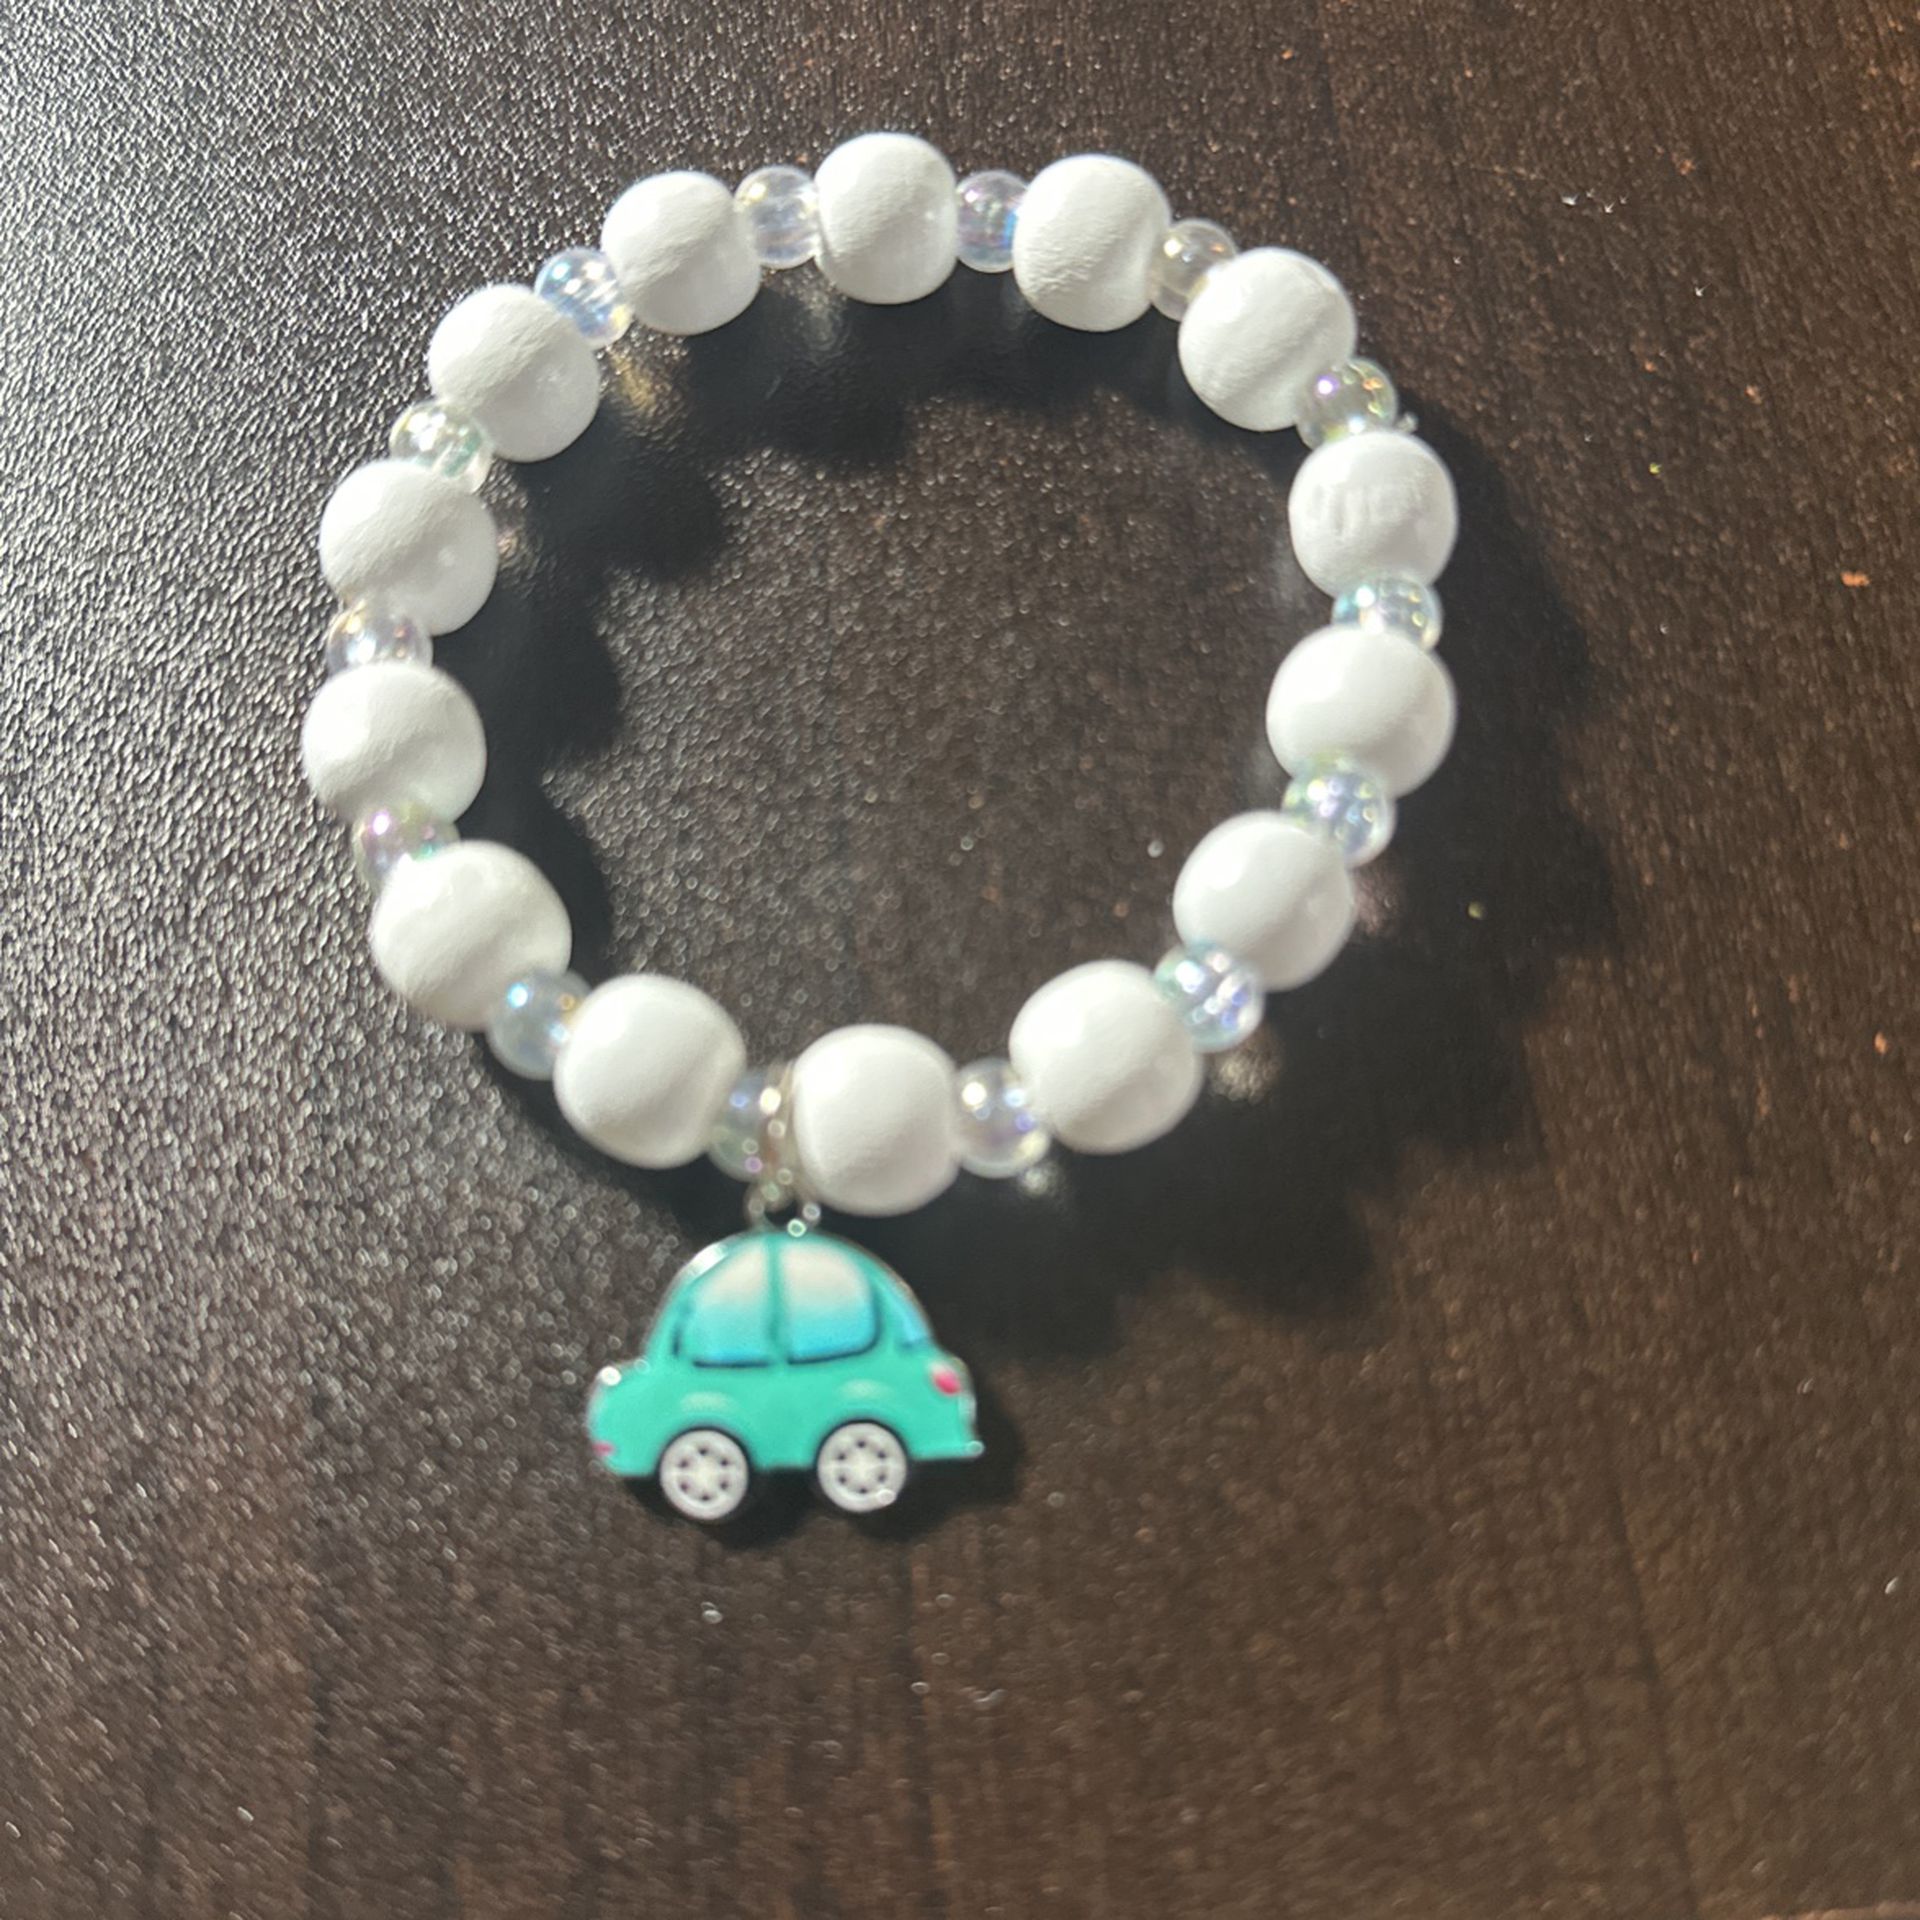 White And Clear Beads Bracelet, With A Blue And White Car Charm